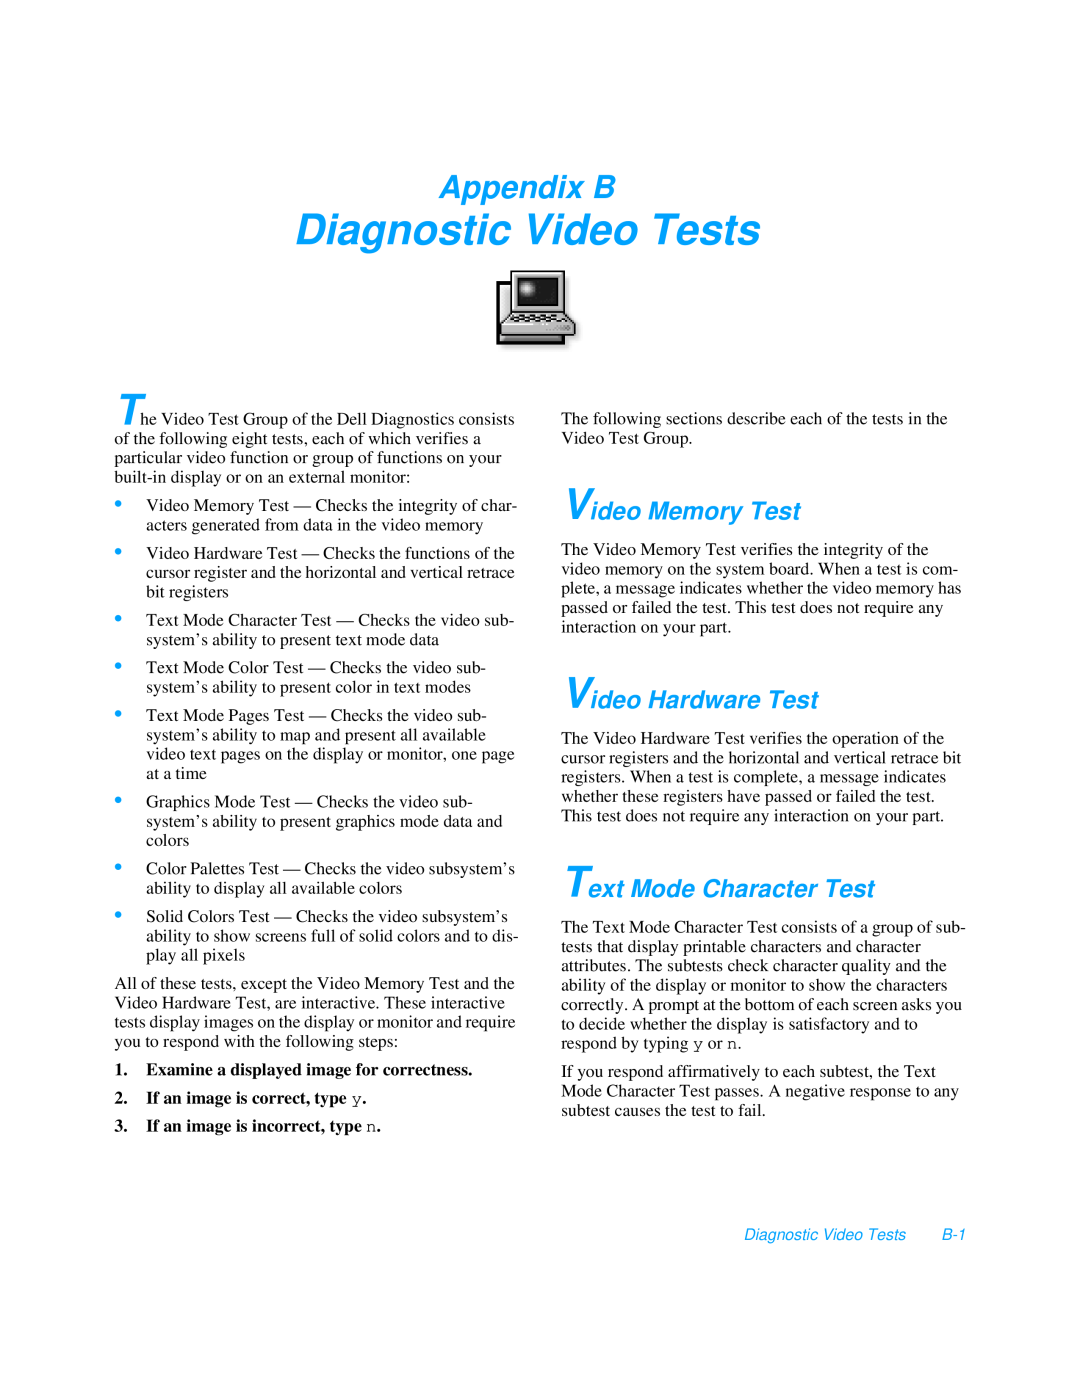 Dell 3000 manual Diagnostic Video Tests, Appendix B, Video Memory Test, Video Hardware Test, Text Mode Character Test 